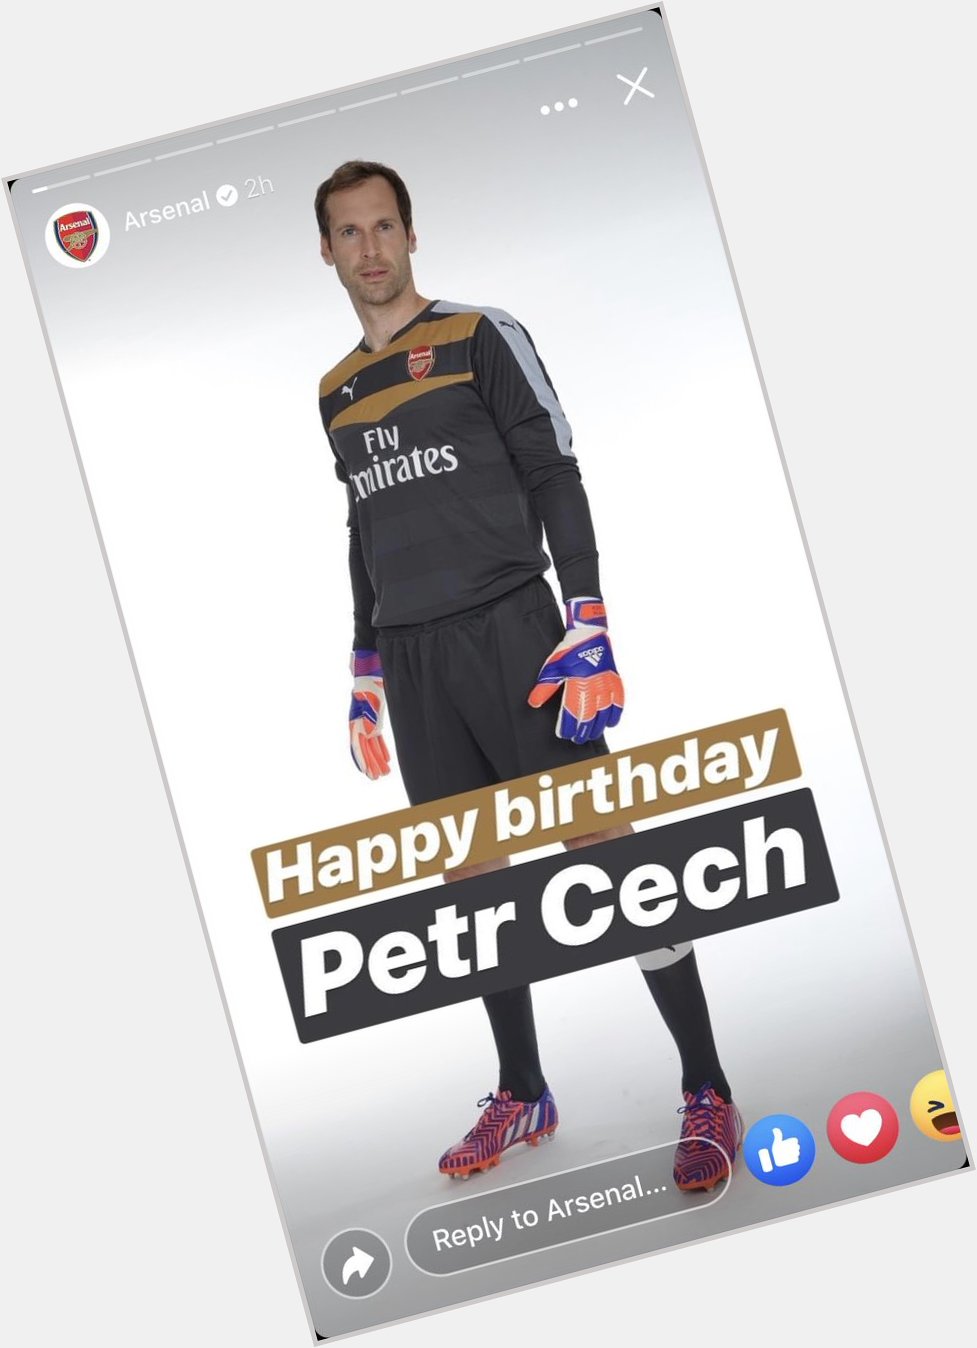 The official Arsenal Facebook account wishing Petr Cech a happy birthday. Doubt it would of gone too well on message 